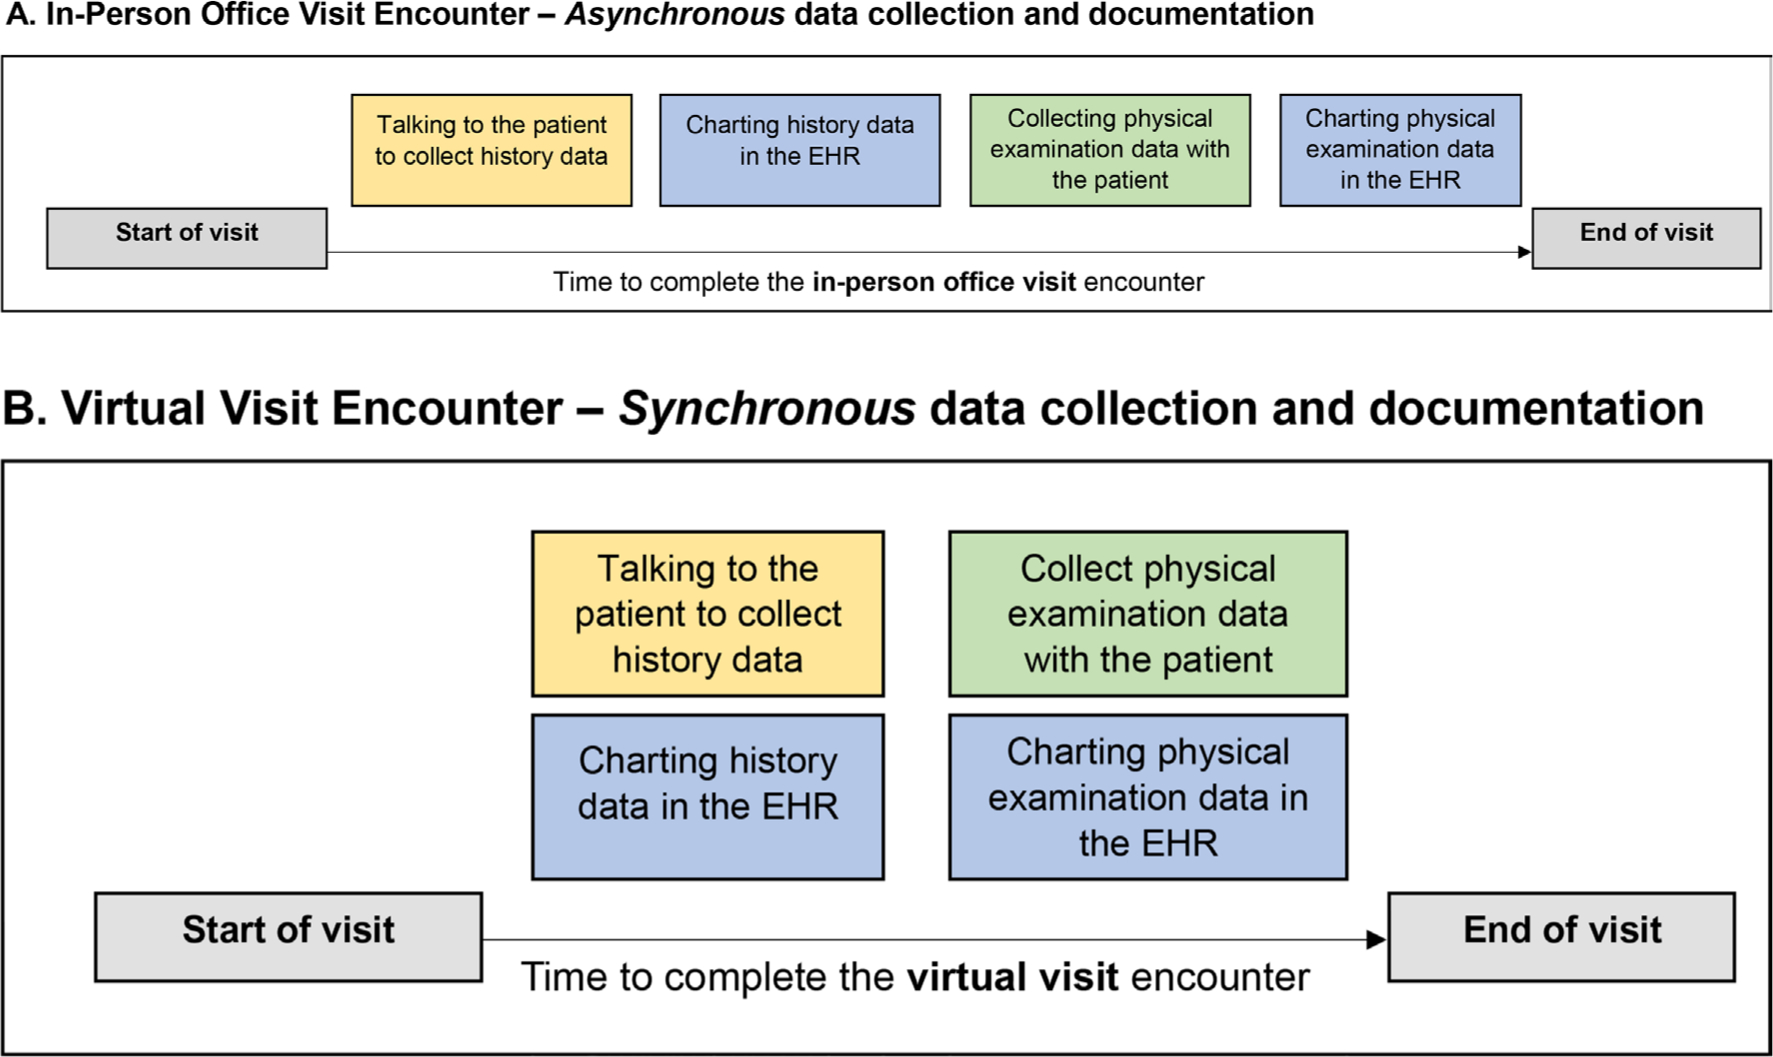 Fig. 4 
            The time to complete an in-person office visit encounter (A) is dependent upon asynchronous collection and documentation of history and physical examination data in the electronic health record (EHR). Virtual visit encounters (B) allow for synchronous collection and documentation of history and physical examination data in the electronic health record (EHR), resulting in a shorter overall time to complete the entire encounter.
          